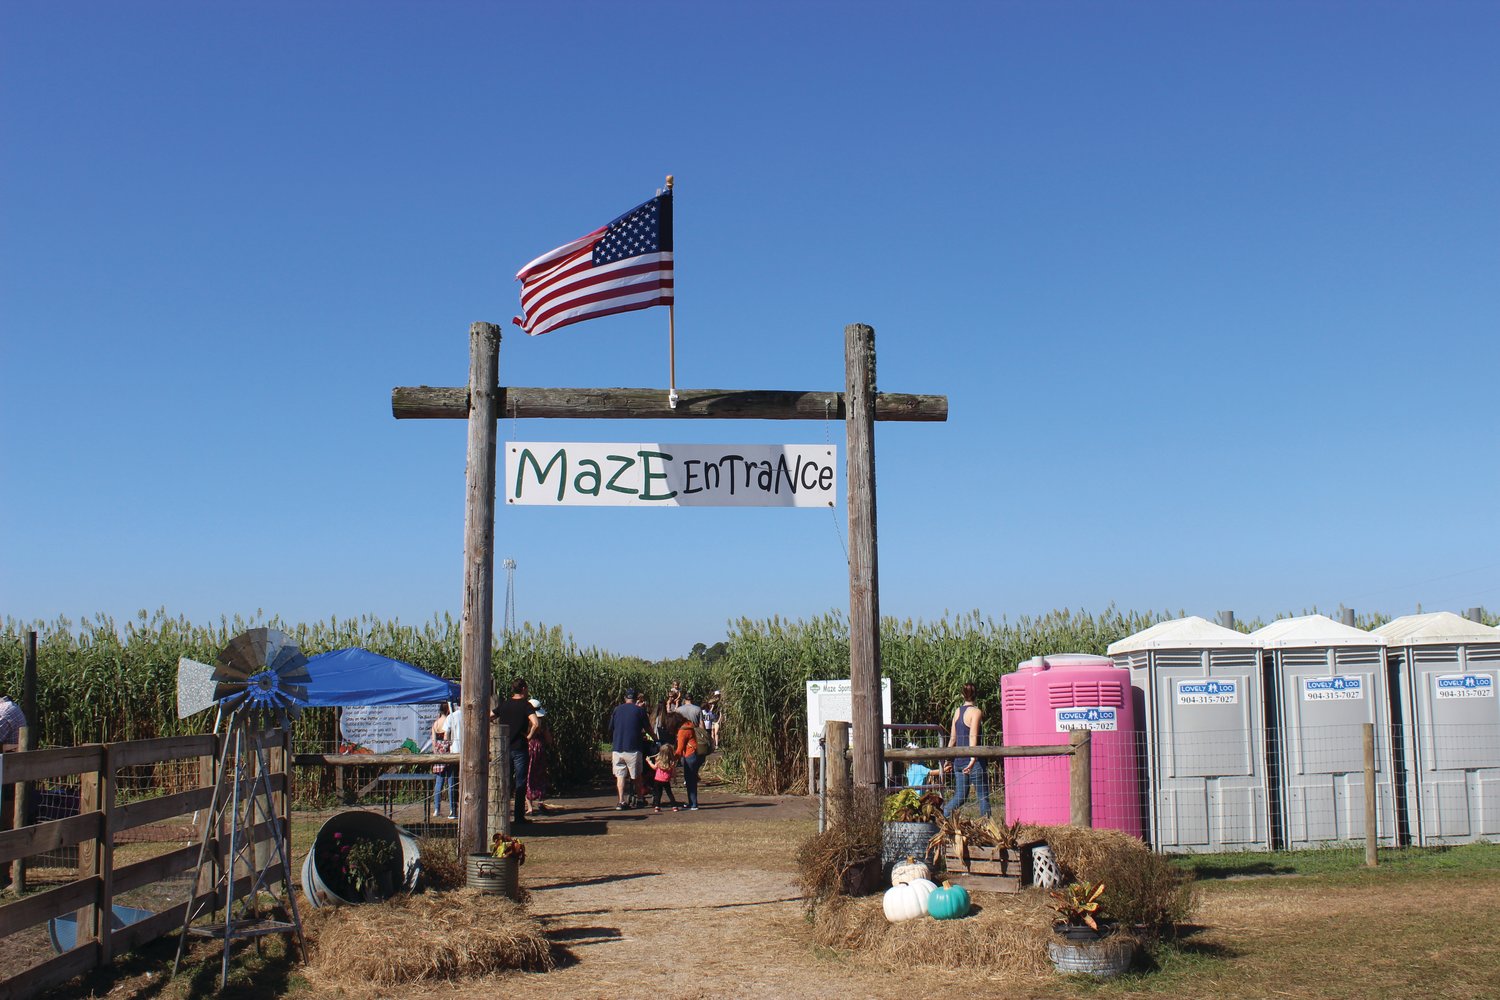 The entrance to the corn maze.